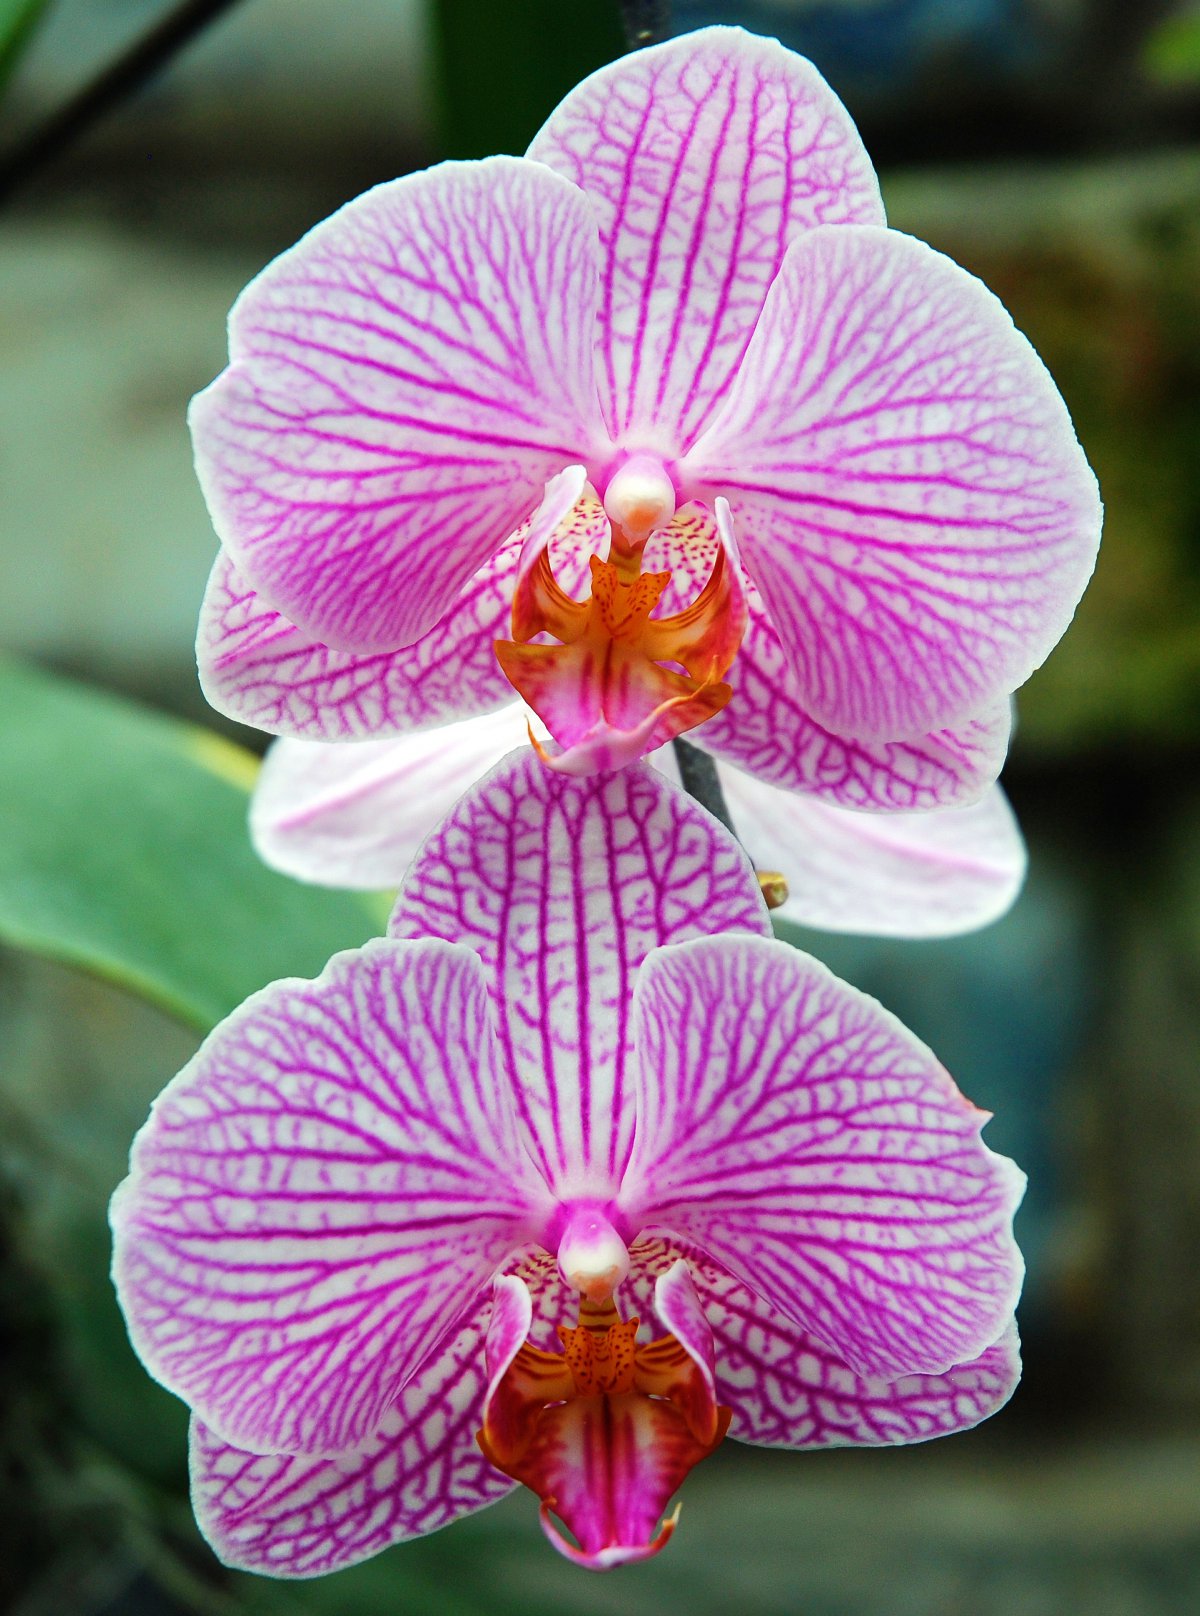 Pictures of elegant orchids in various colors